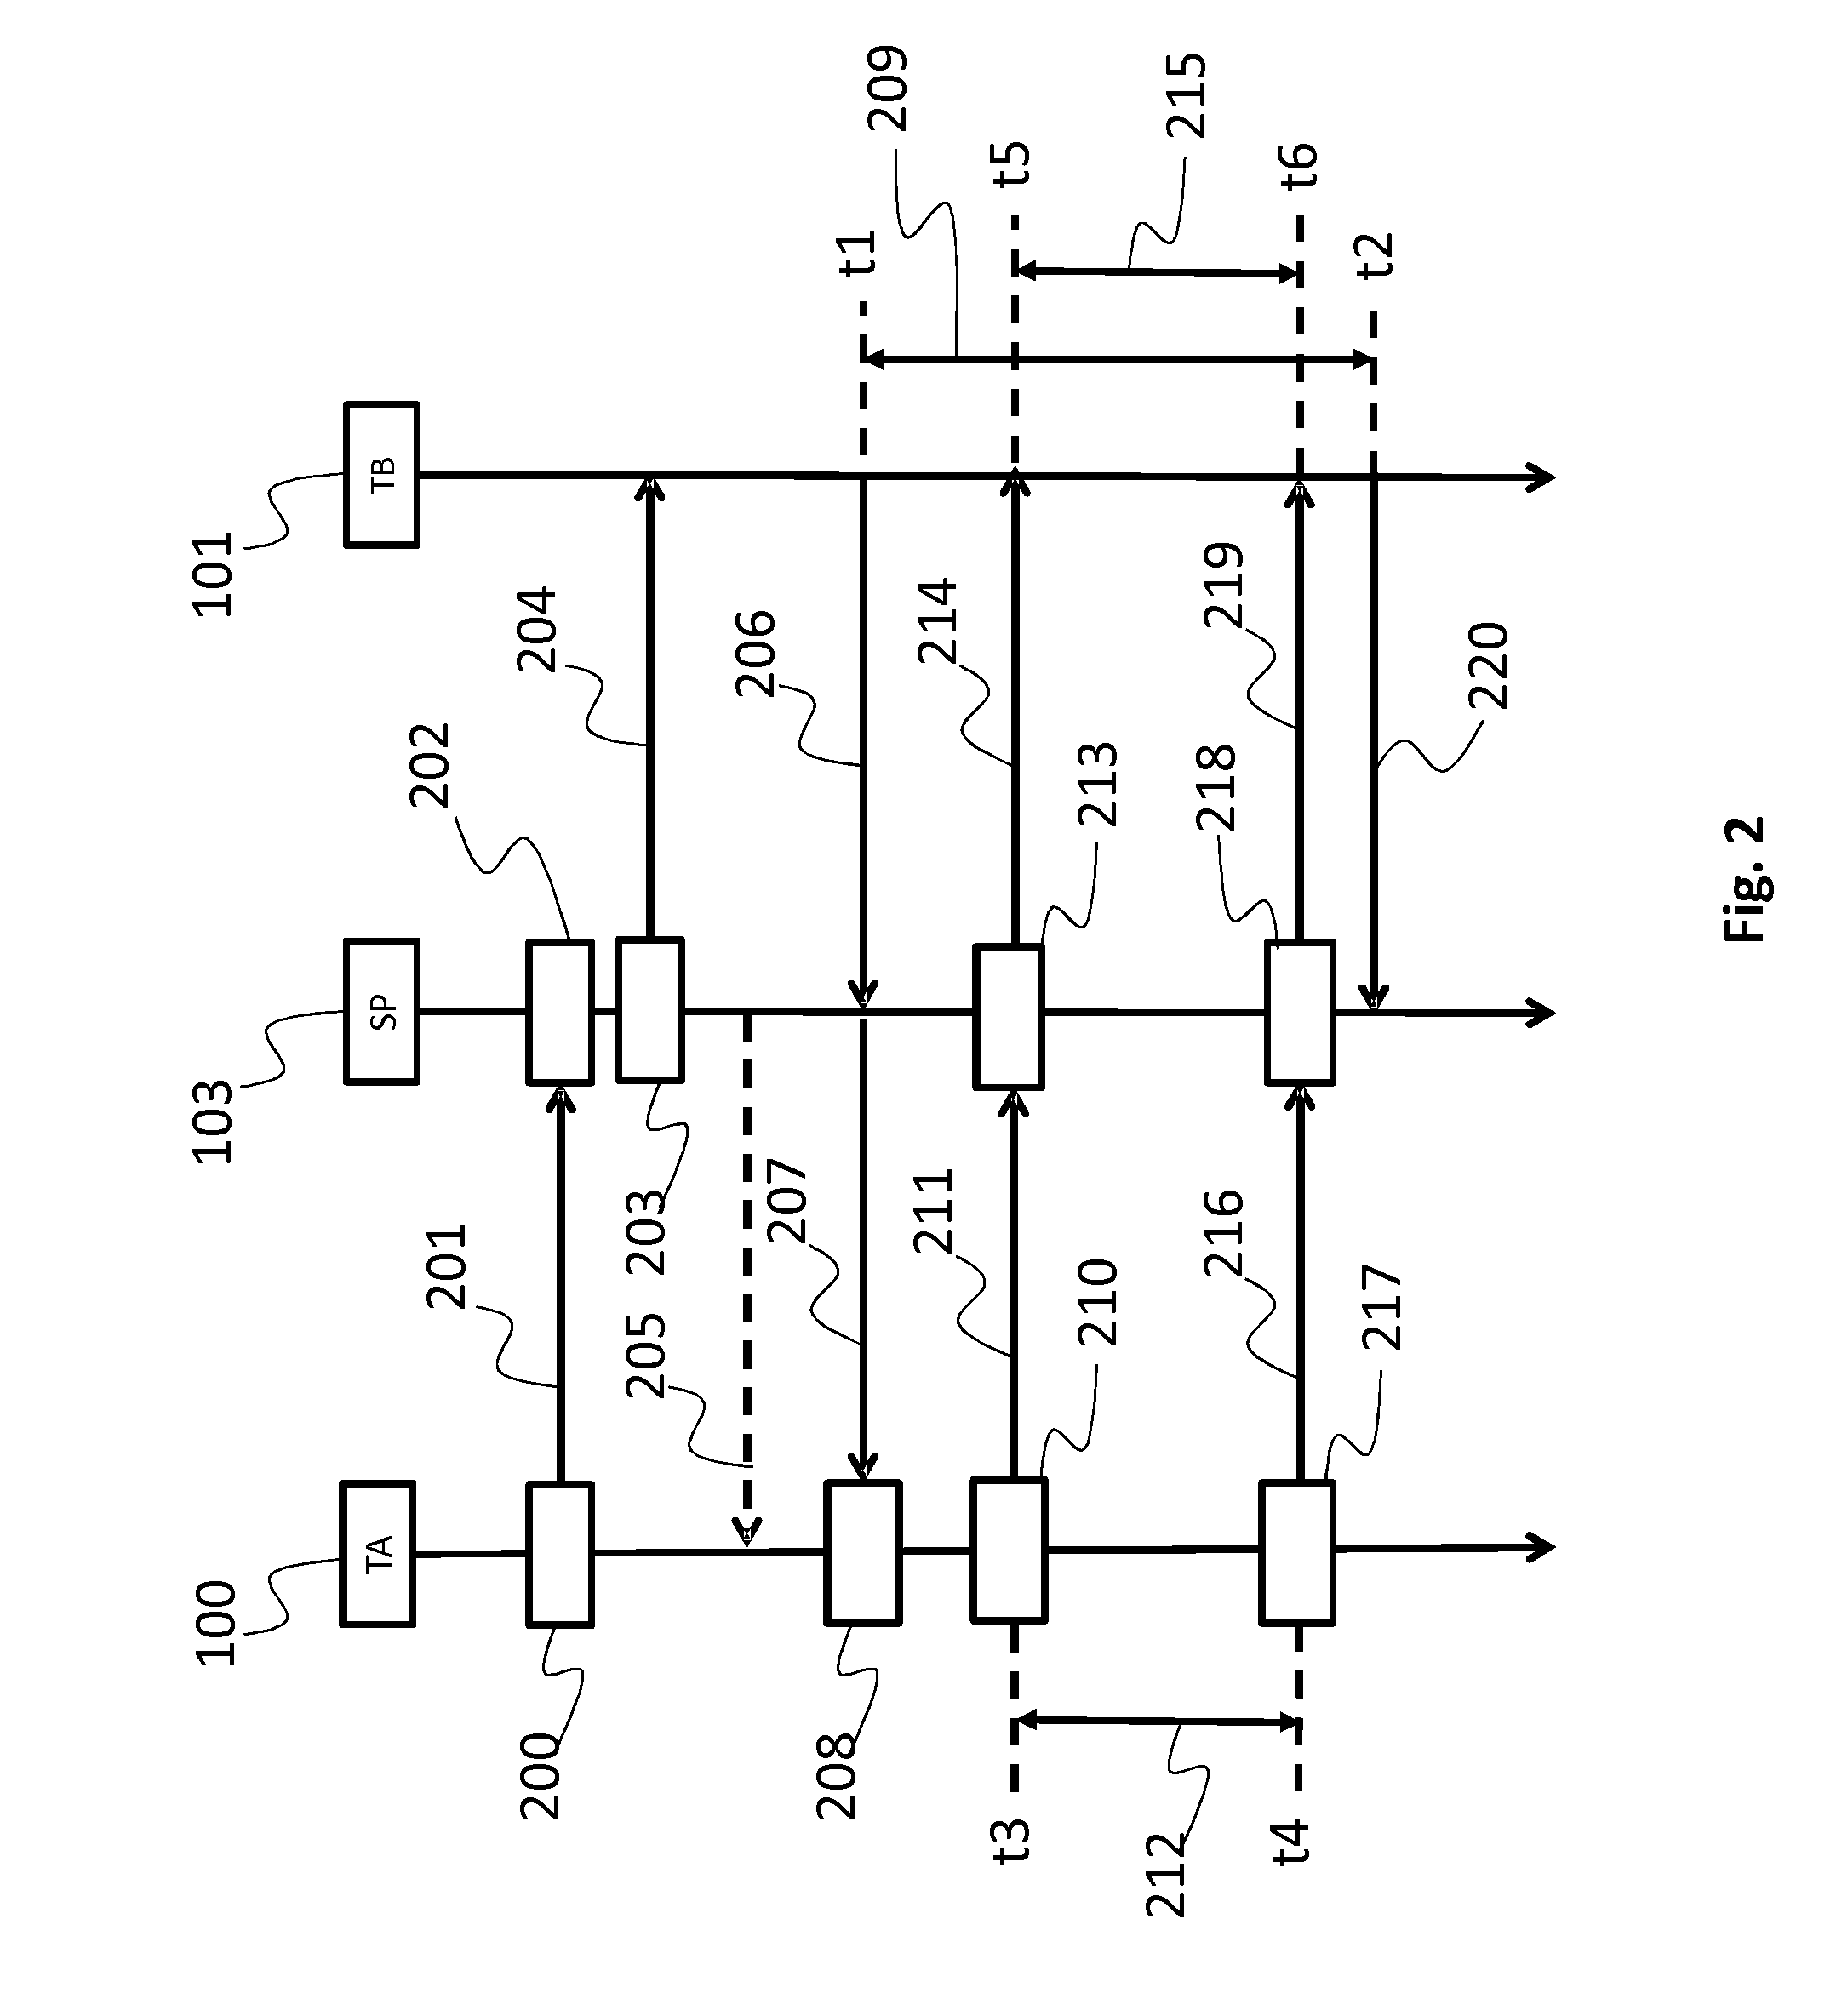 Method of synchronous image sharing